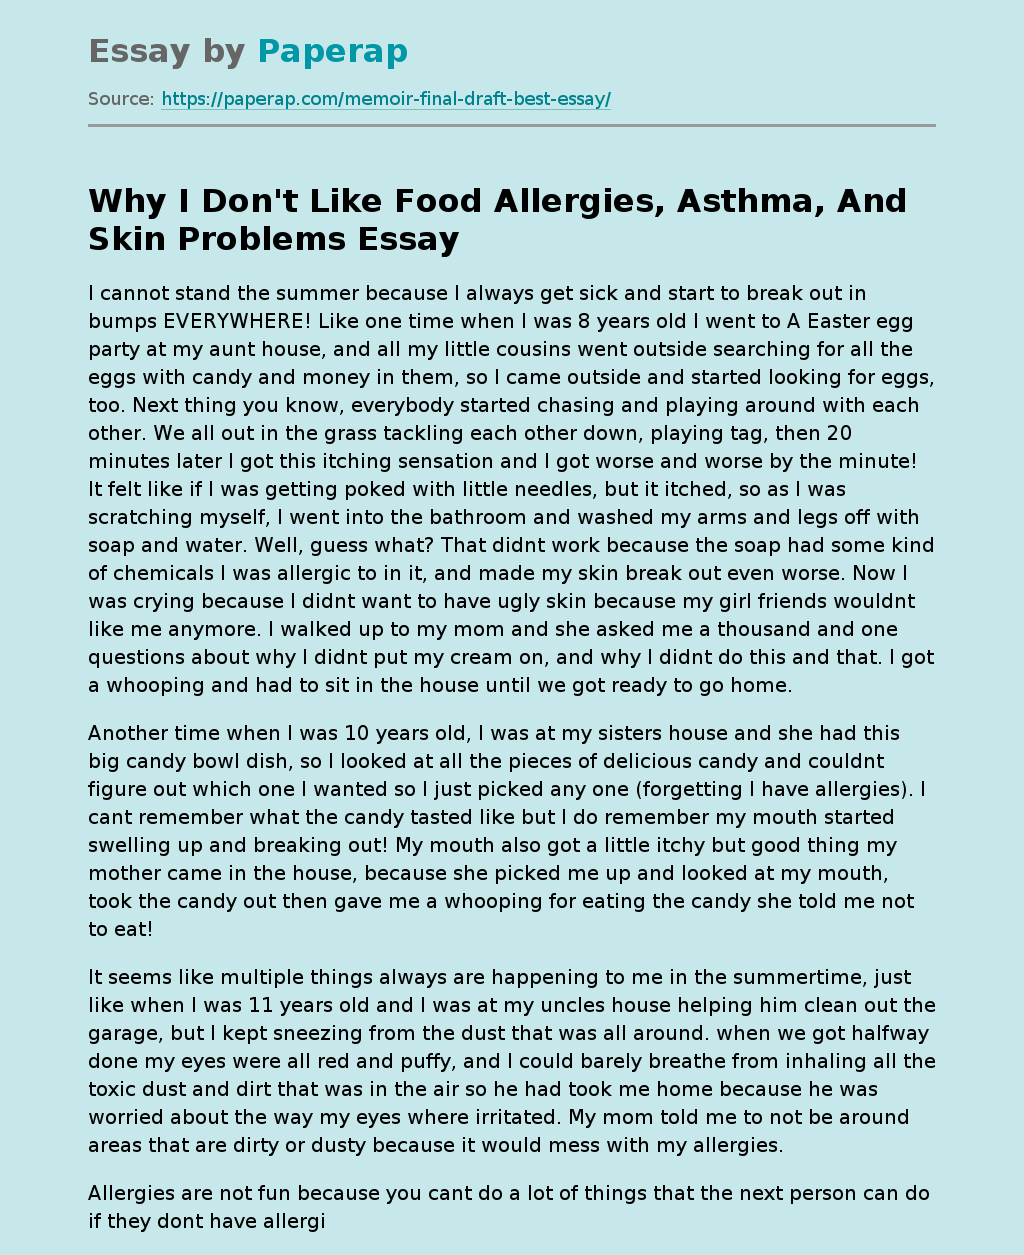 Why I Don't Like Food Allergies, Asthma, And Skin Problems